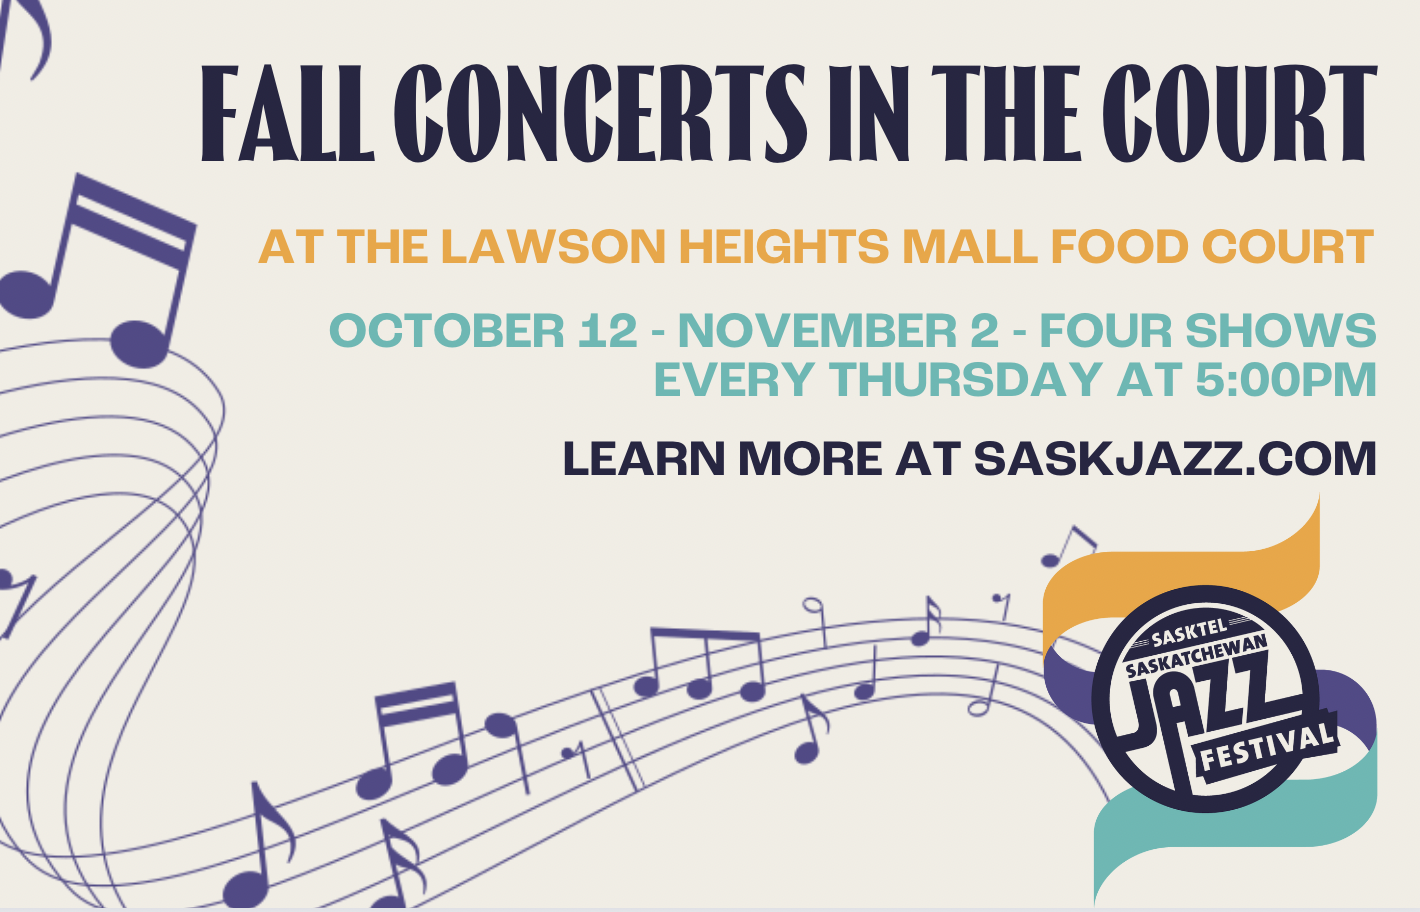 Fall Concerts in the Court at Lawson Heights Mall